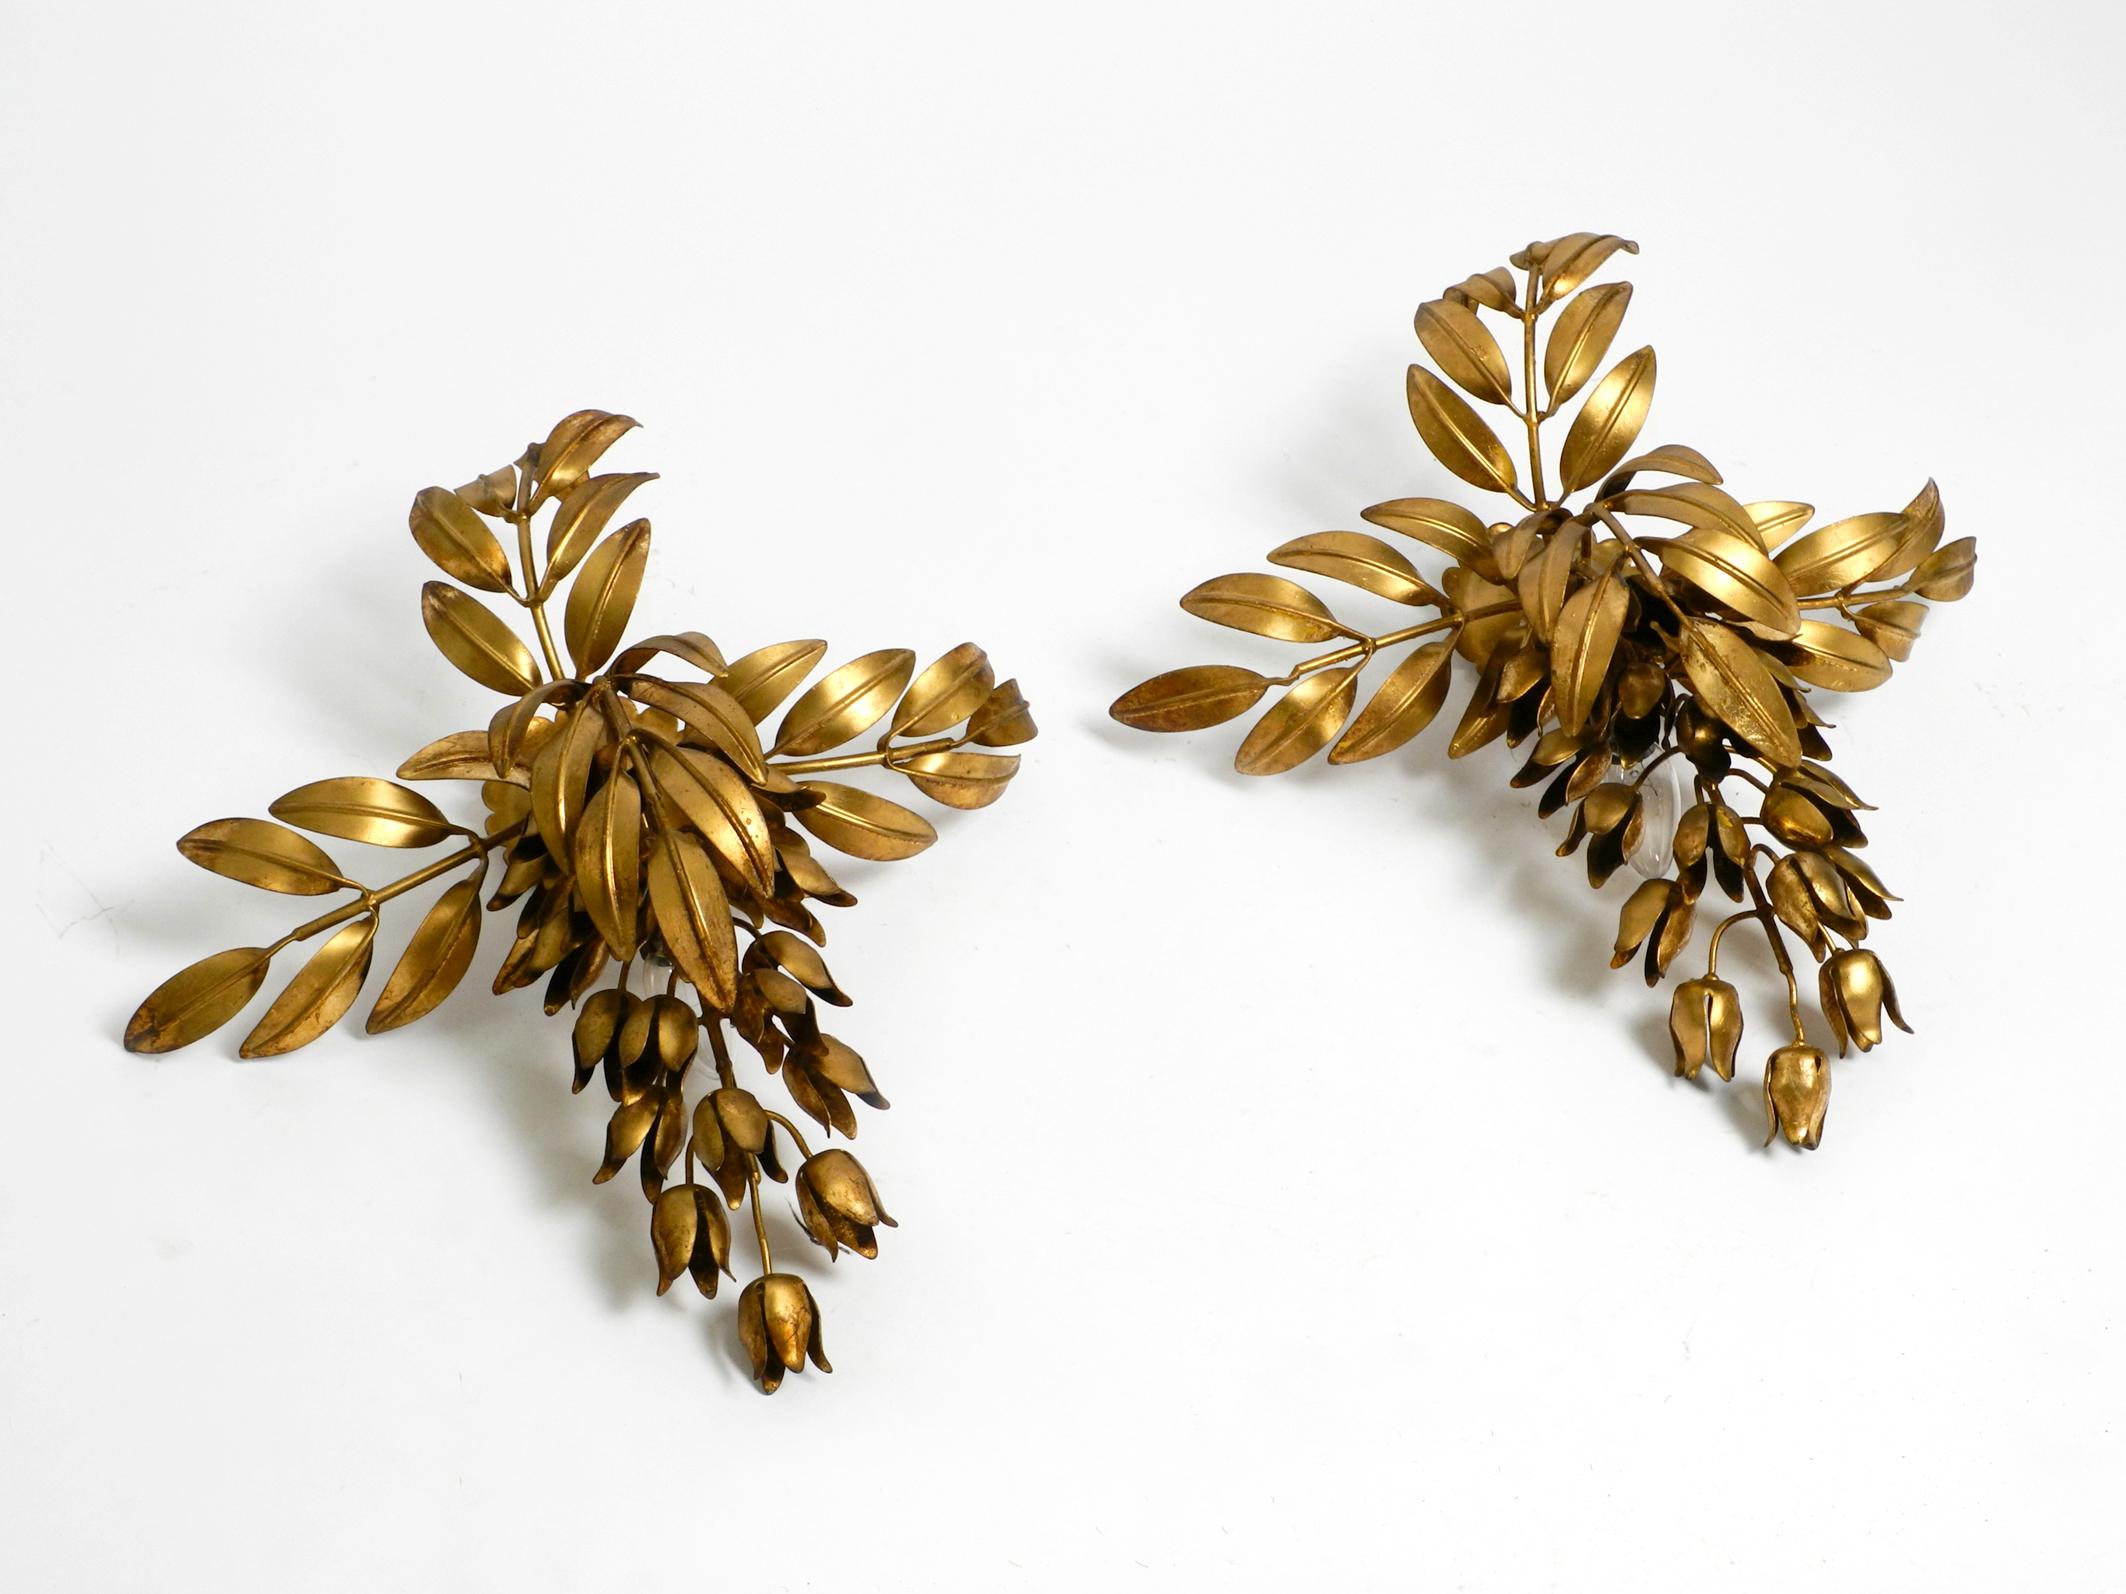 Pair of rare large 1970s gold plated floral wall lamps.
Design by Hans Kögl model Wisteria. Very old production. Bought from their first owner.
Beautiful design with lots of details. These two wall lamps are the XL versions of the Wisteria